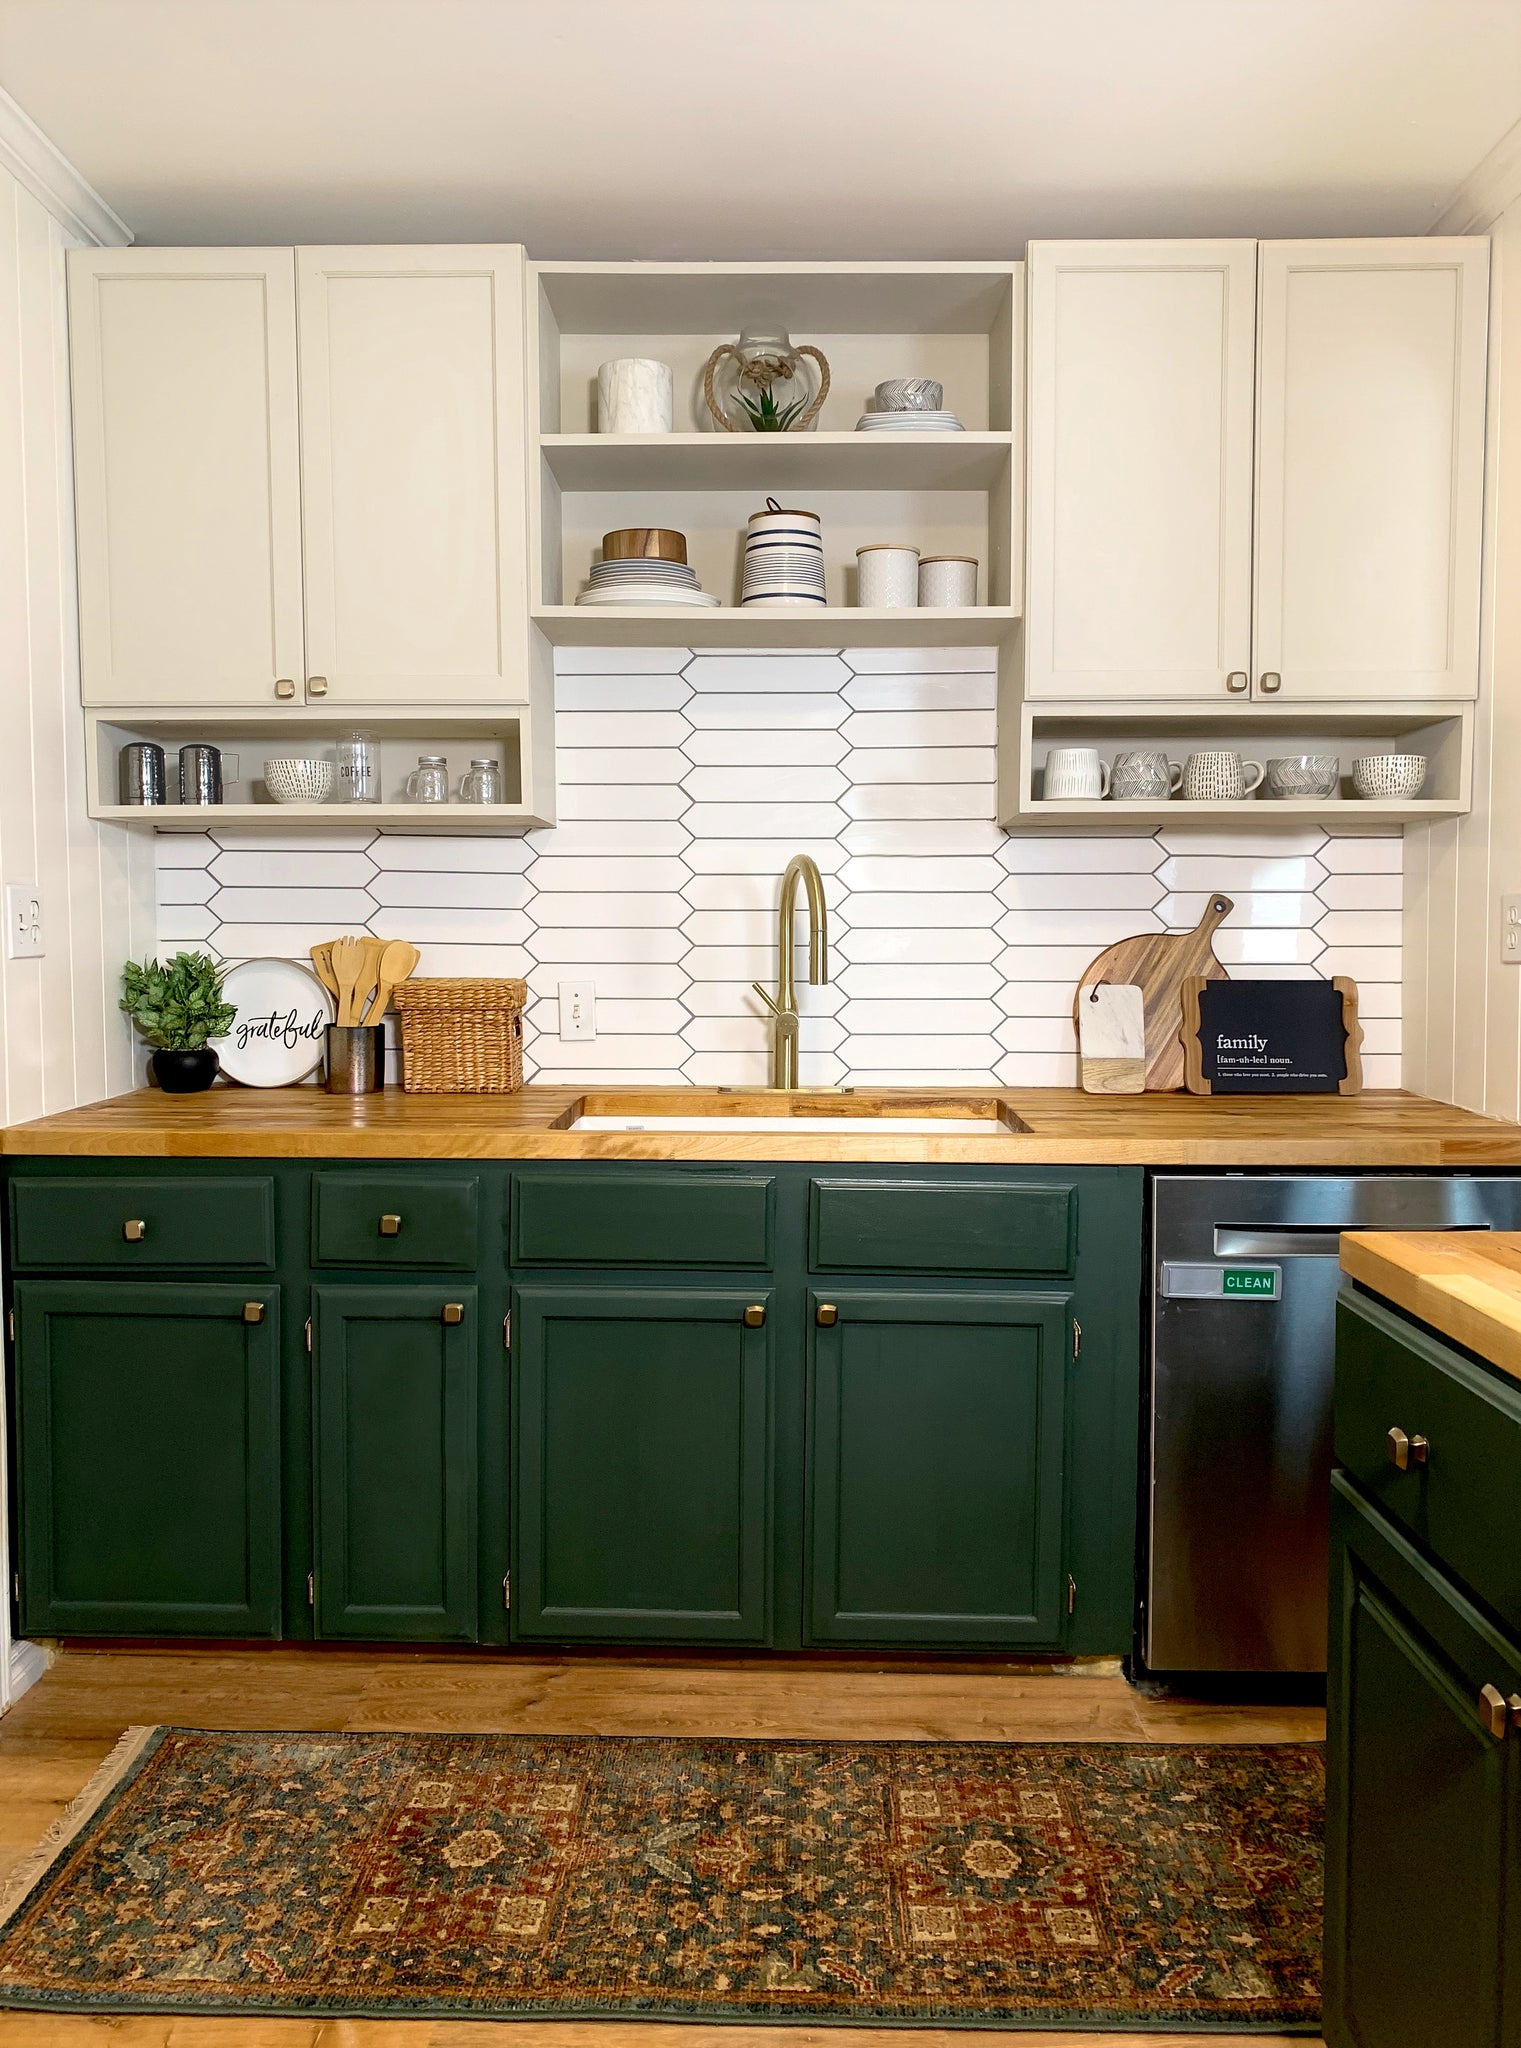 Kitchen Renovation with two tone cabinets and subway tile